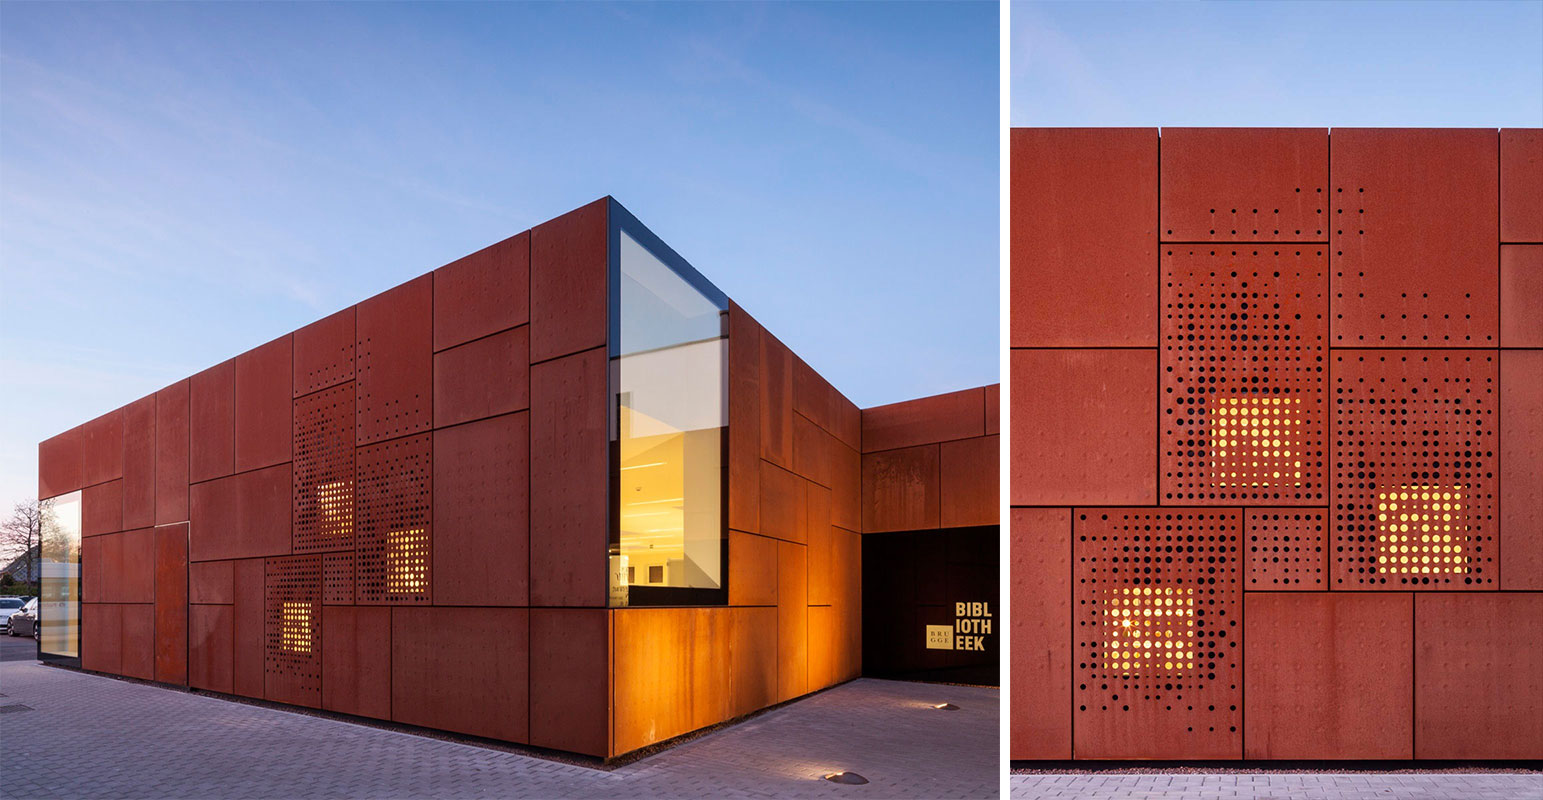 Extension to the City Library in Bruges designed by Belgian architects Studio Farris. The building is clad in Corten steel panels and was opened to the public in 2015. Photography by Tim Van de Velde.